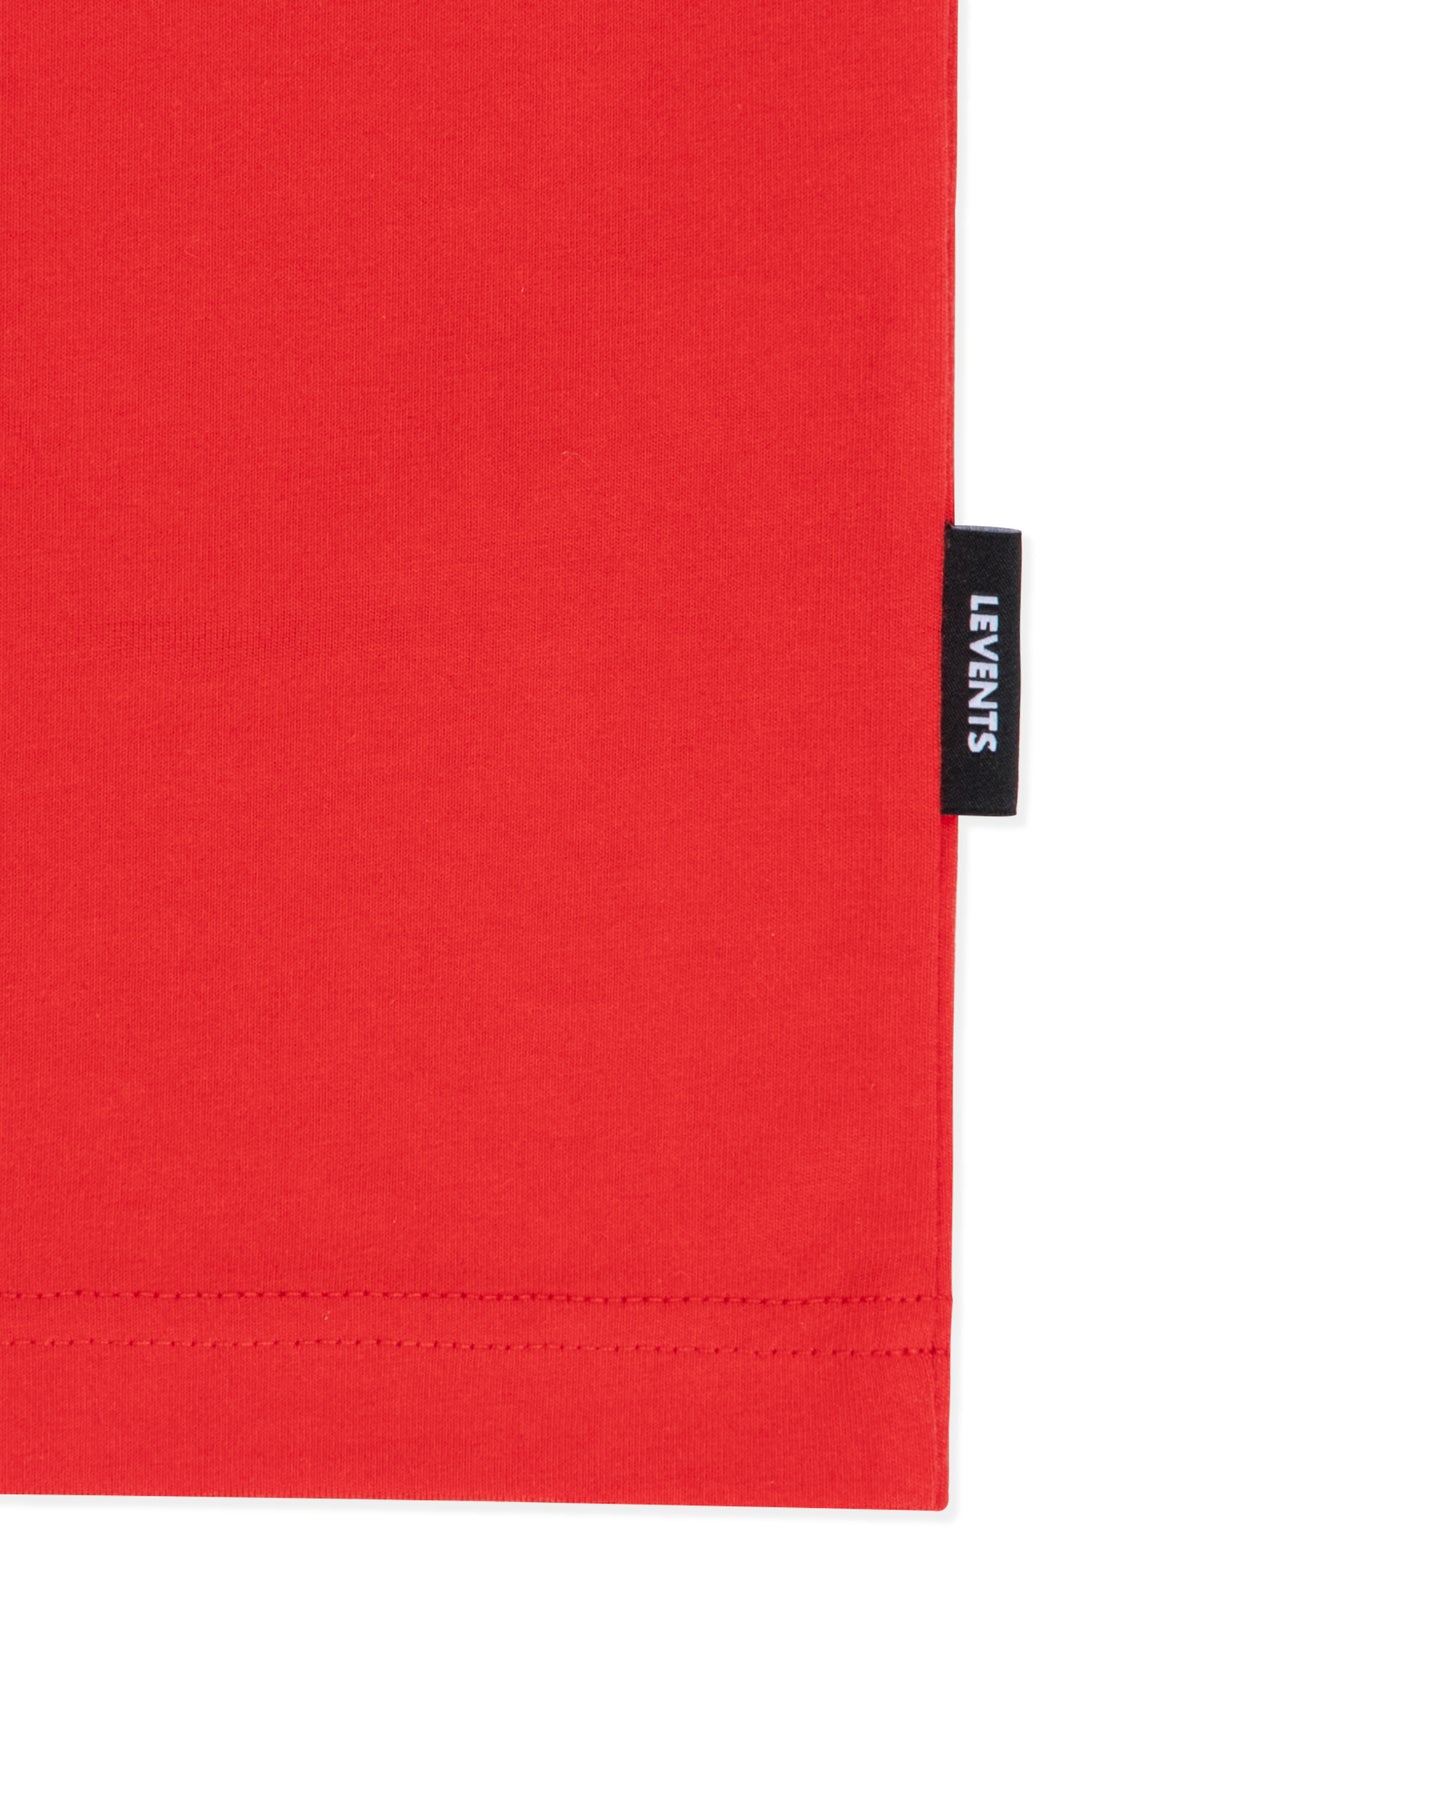 Levents® XL Logo 2.0 Tee/ Red